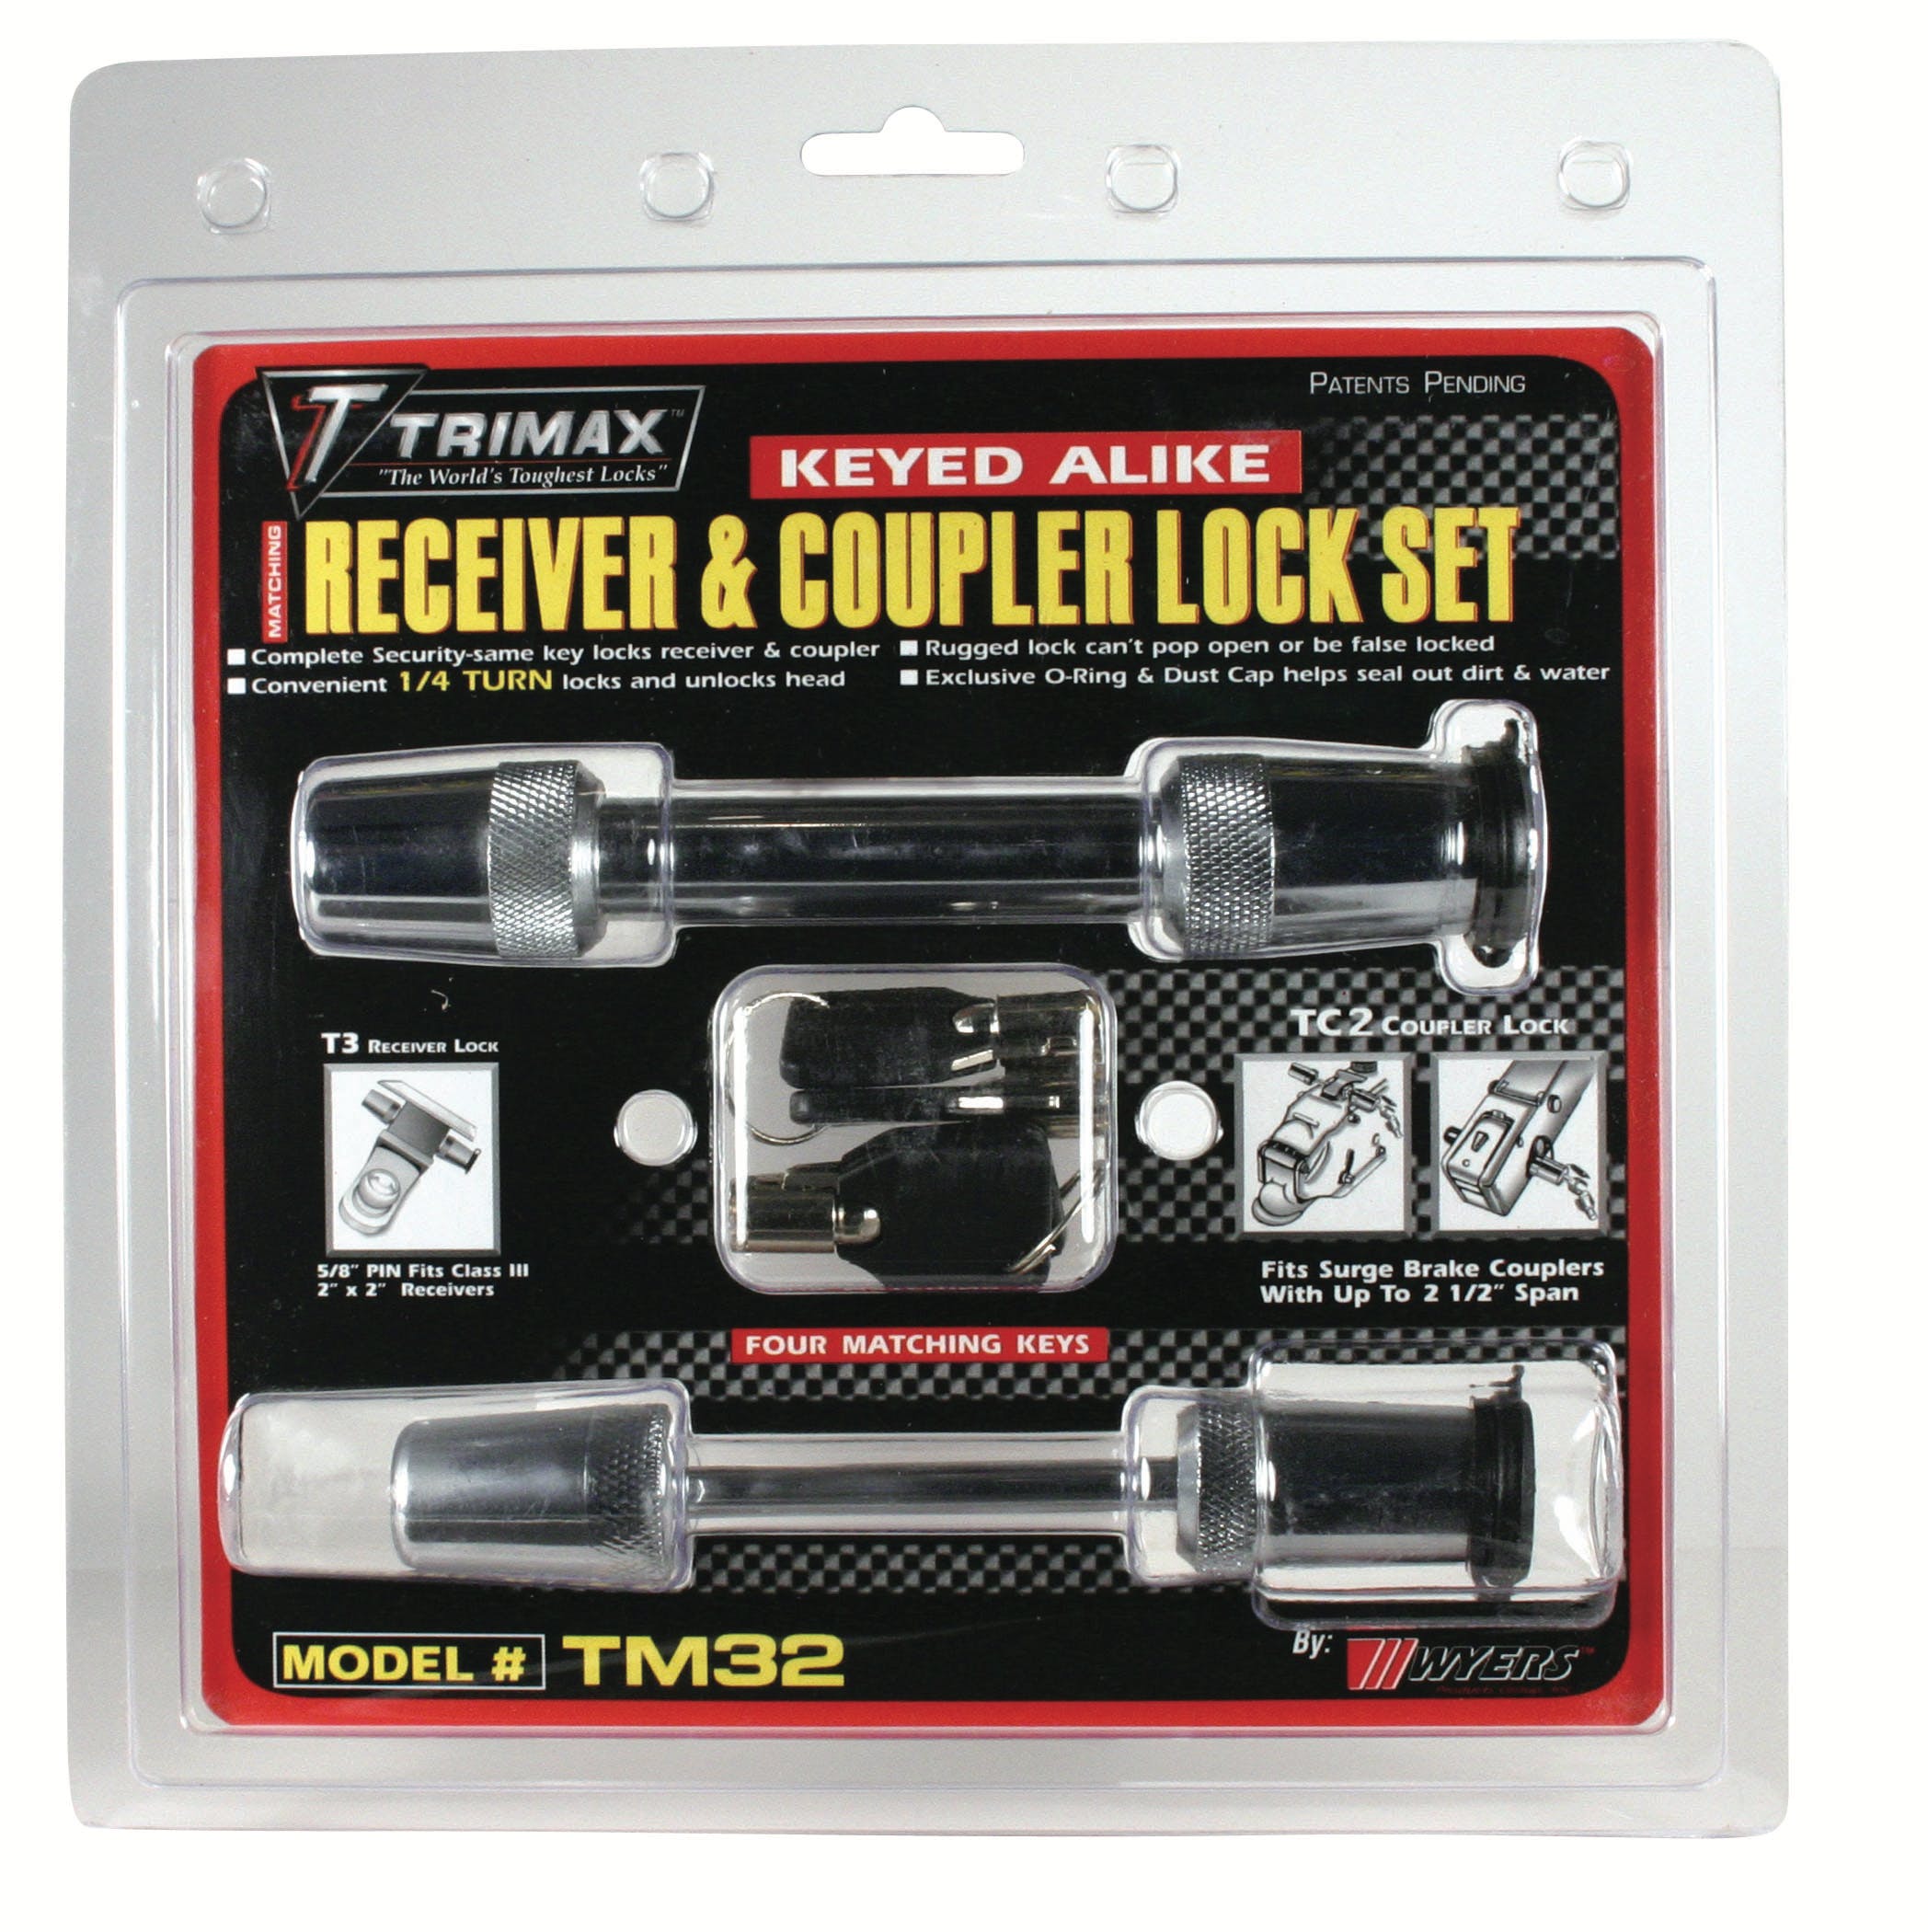 TRIMAX TM32 TRIMAX T3 - 5/8 inch Receiver and TC2 - 2-1/2 inch Span Coupler Lock